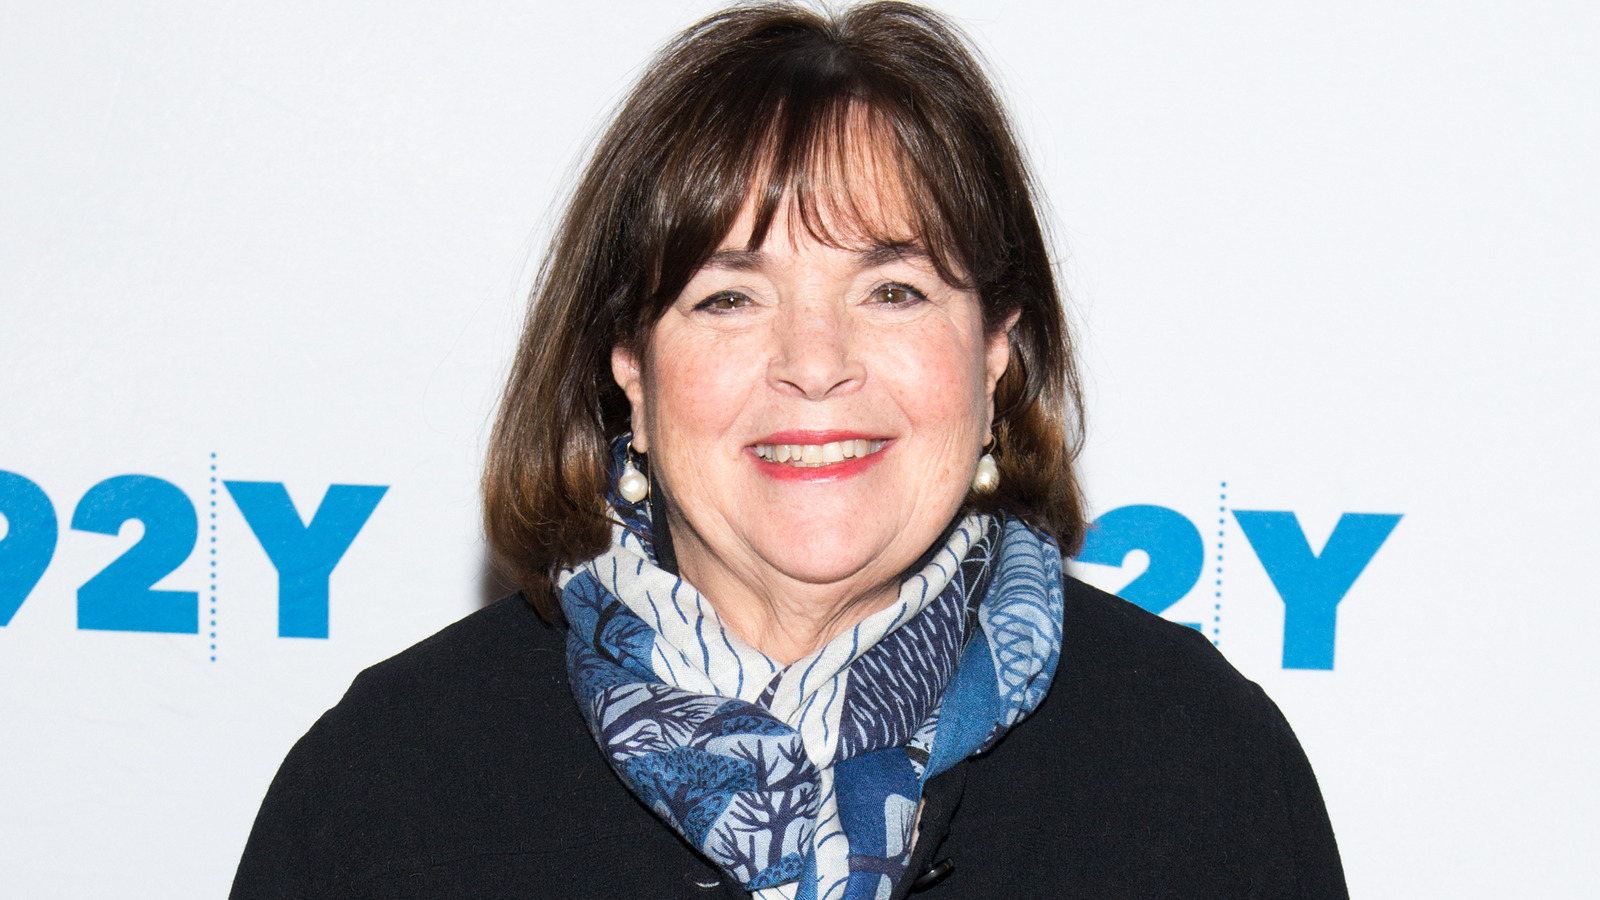 The Most Underrated Vegetable, According To Ina Garten